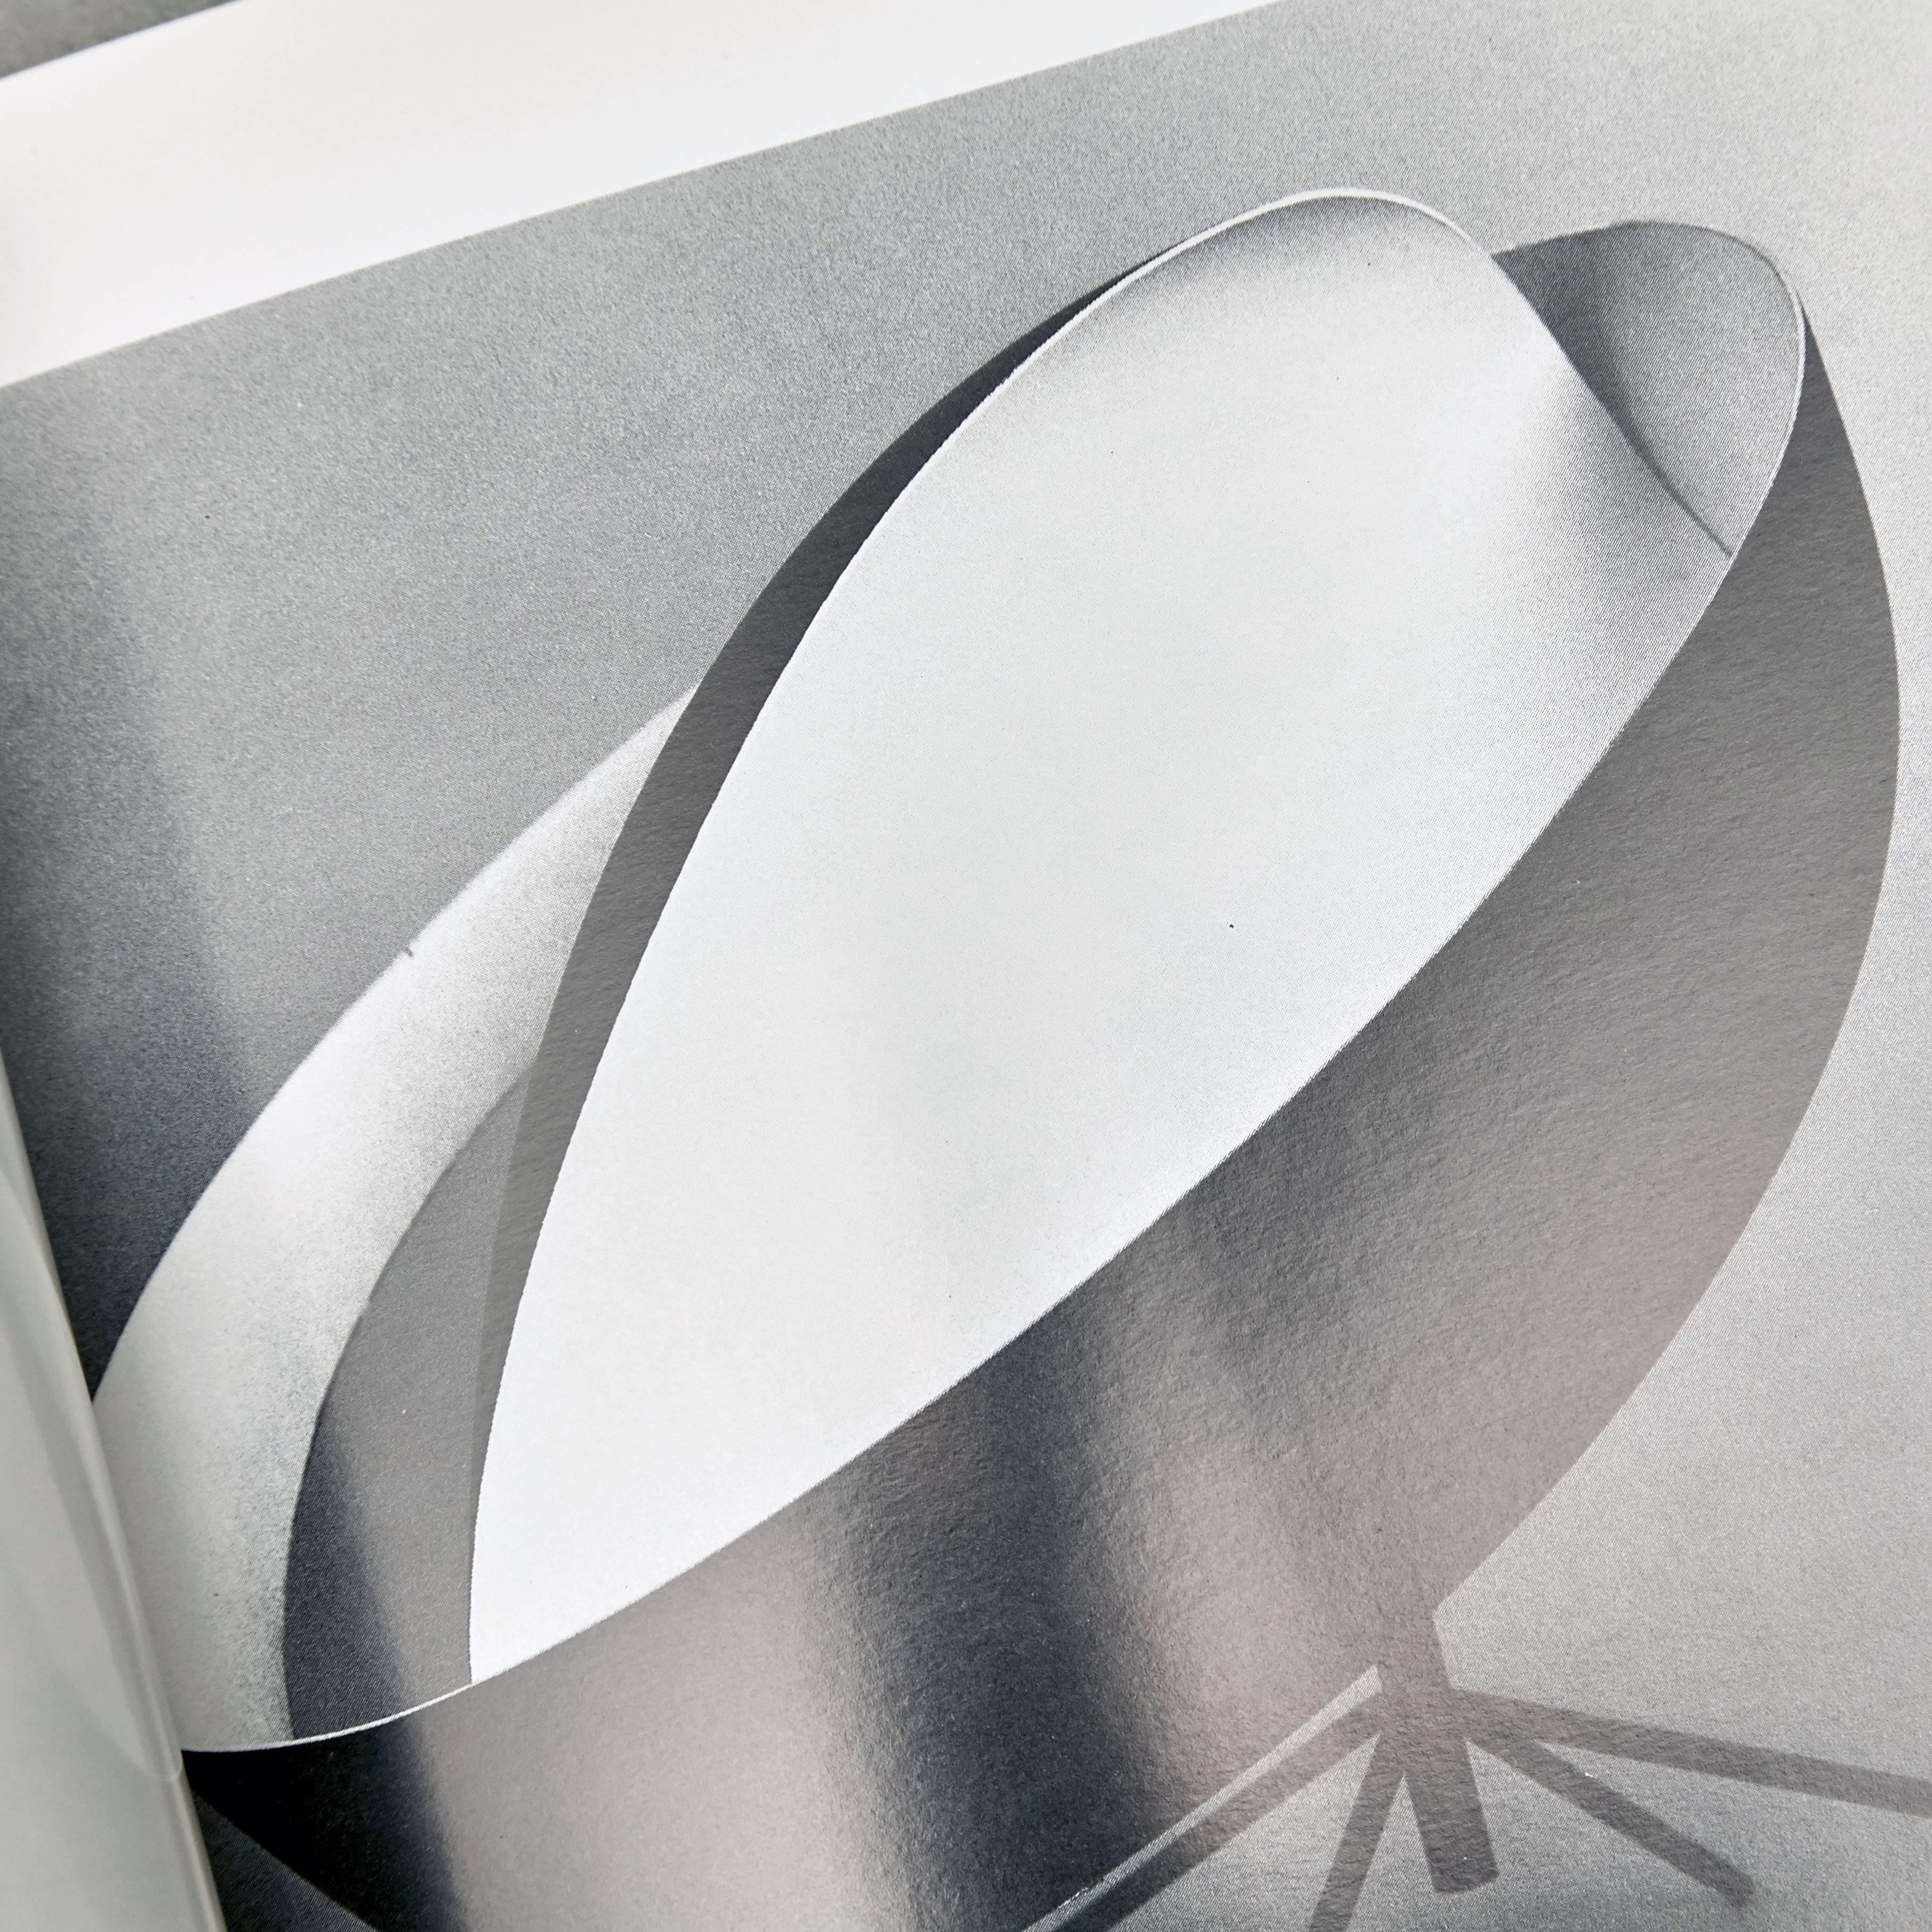 Serge Mouille Luminaires Book 